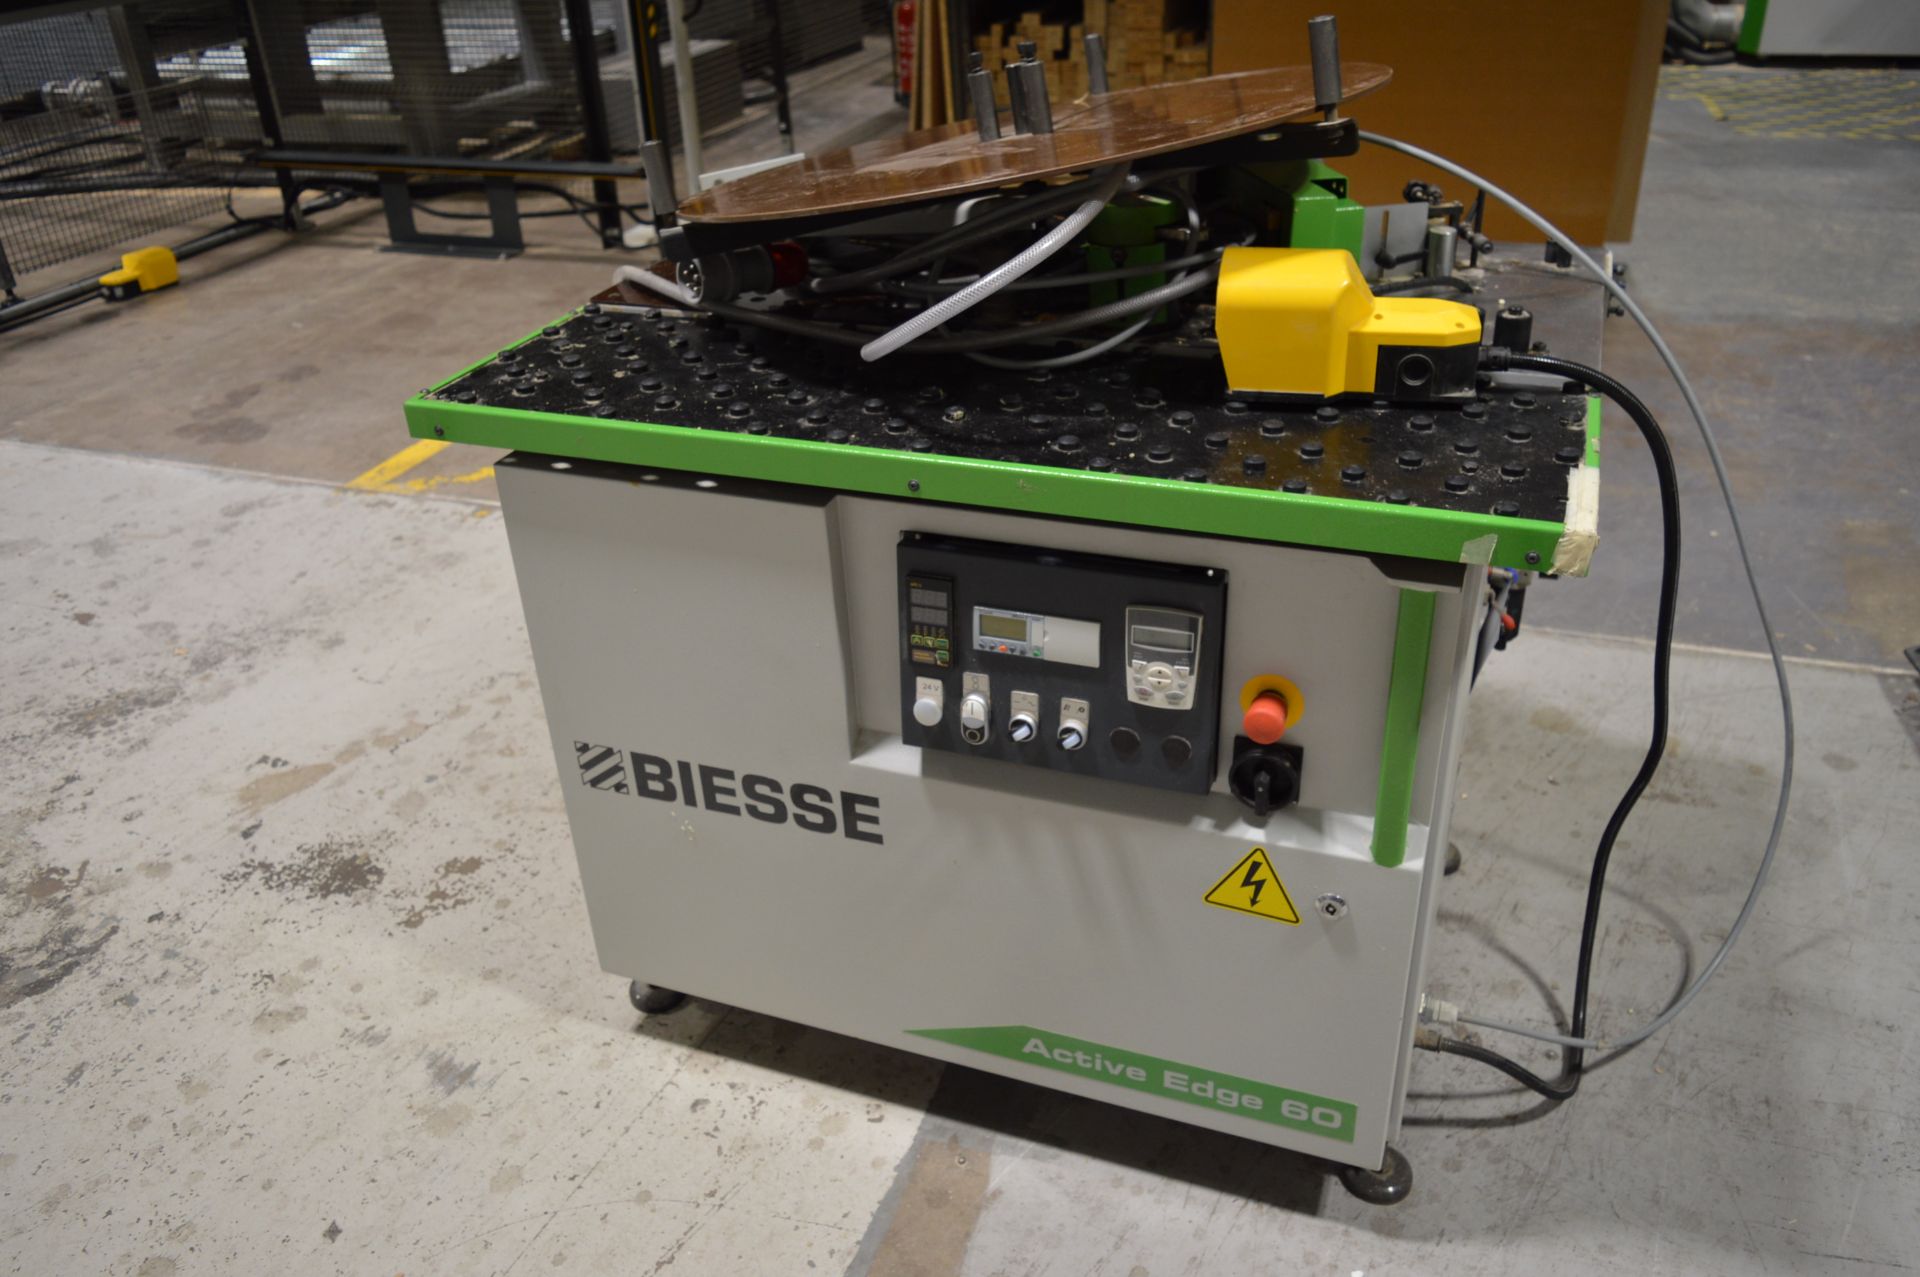 Biesse Active Edge 60 single sided edge bander, Serial No. 06920 (2015). Weight: 250 kg; table size: